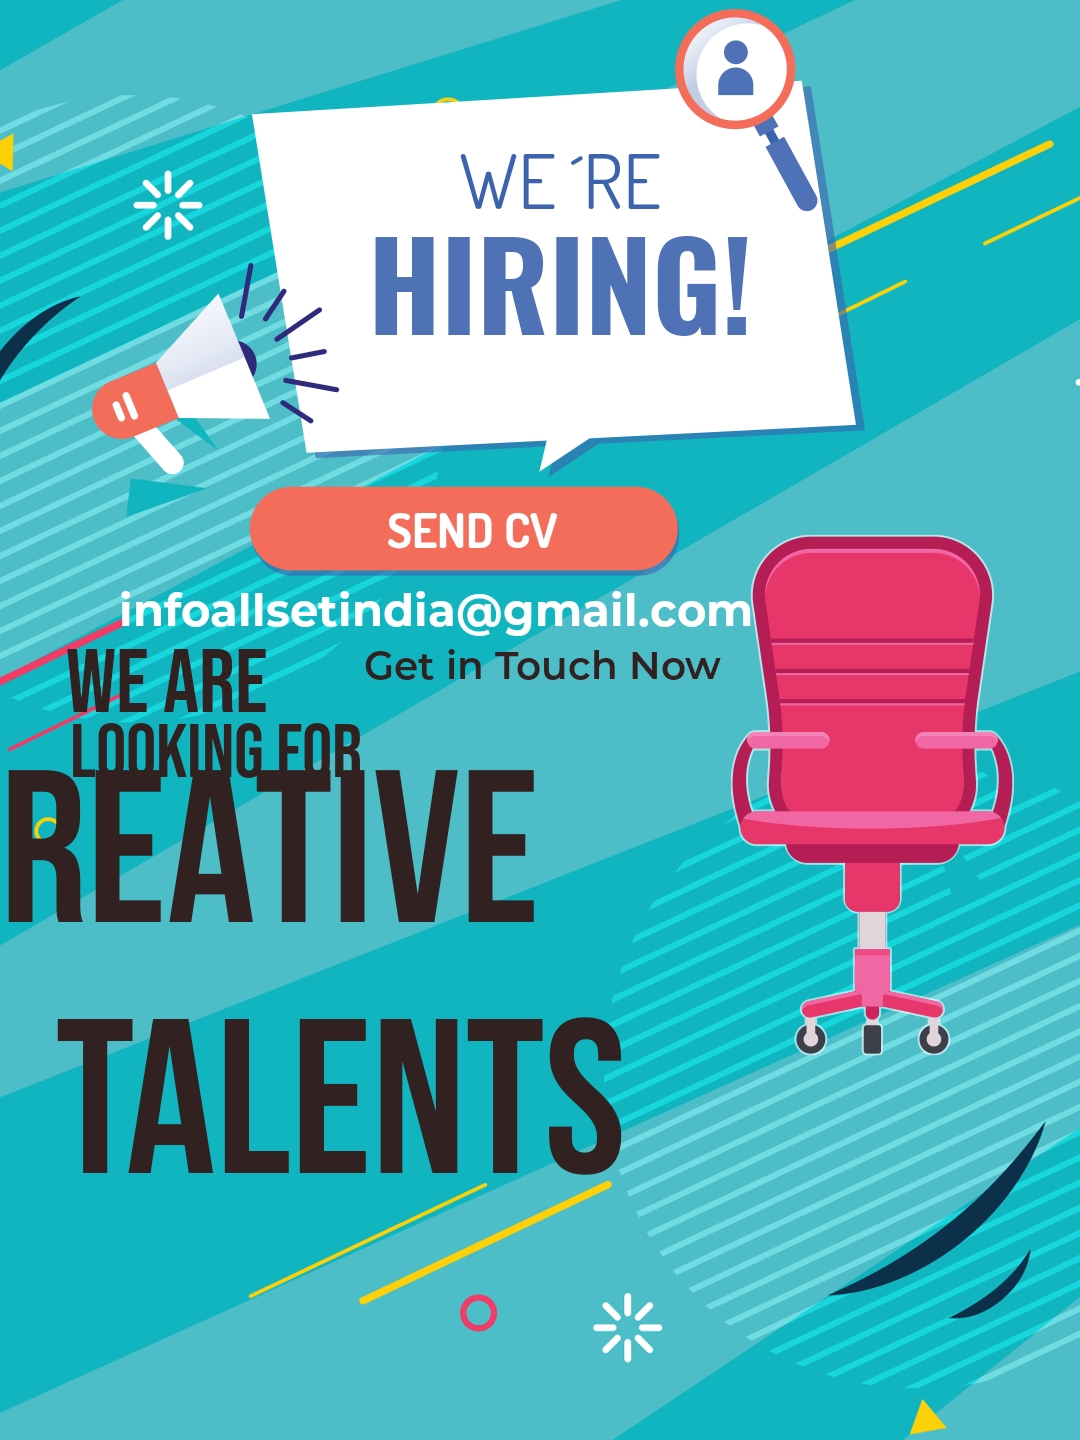 We Are Hiring image